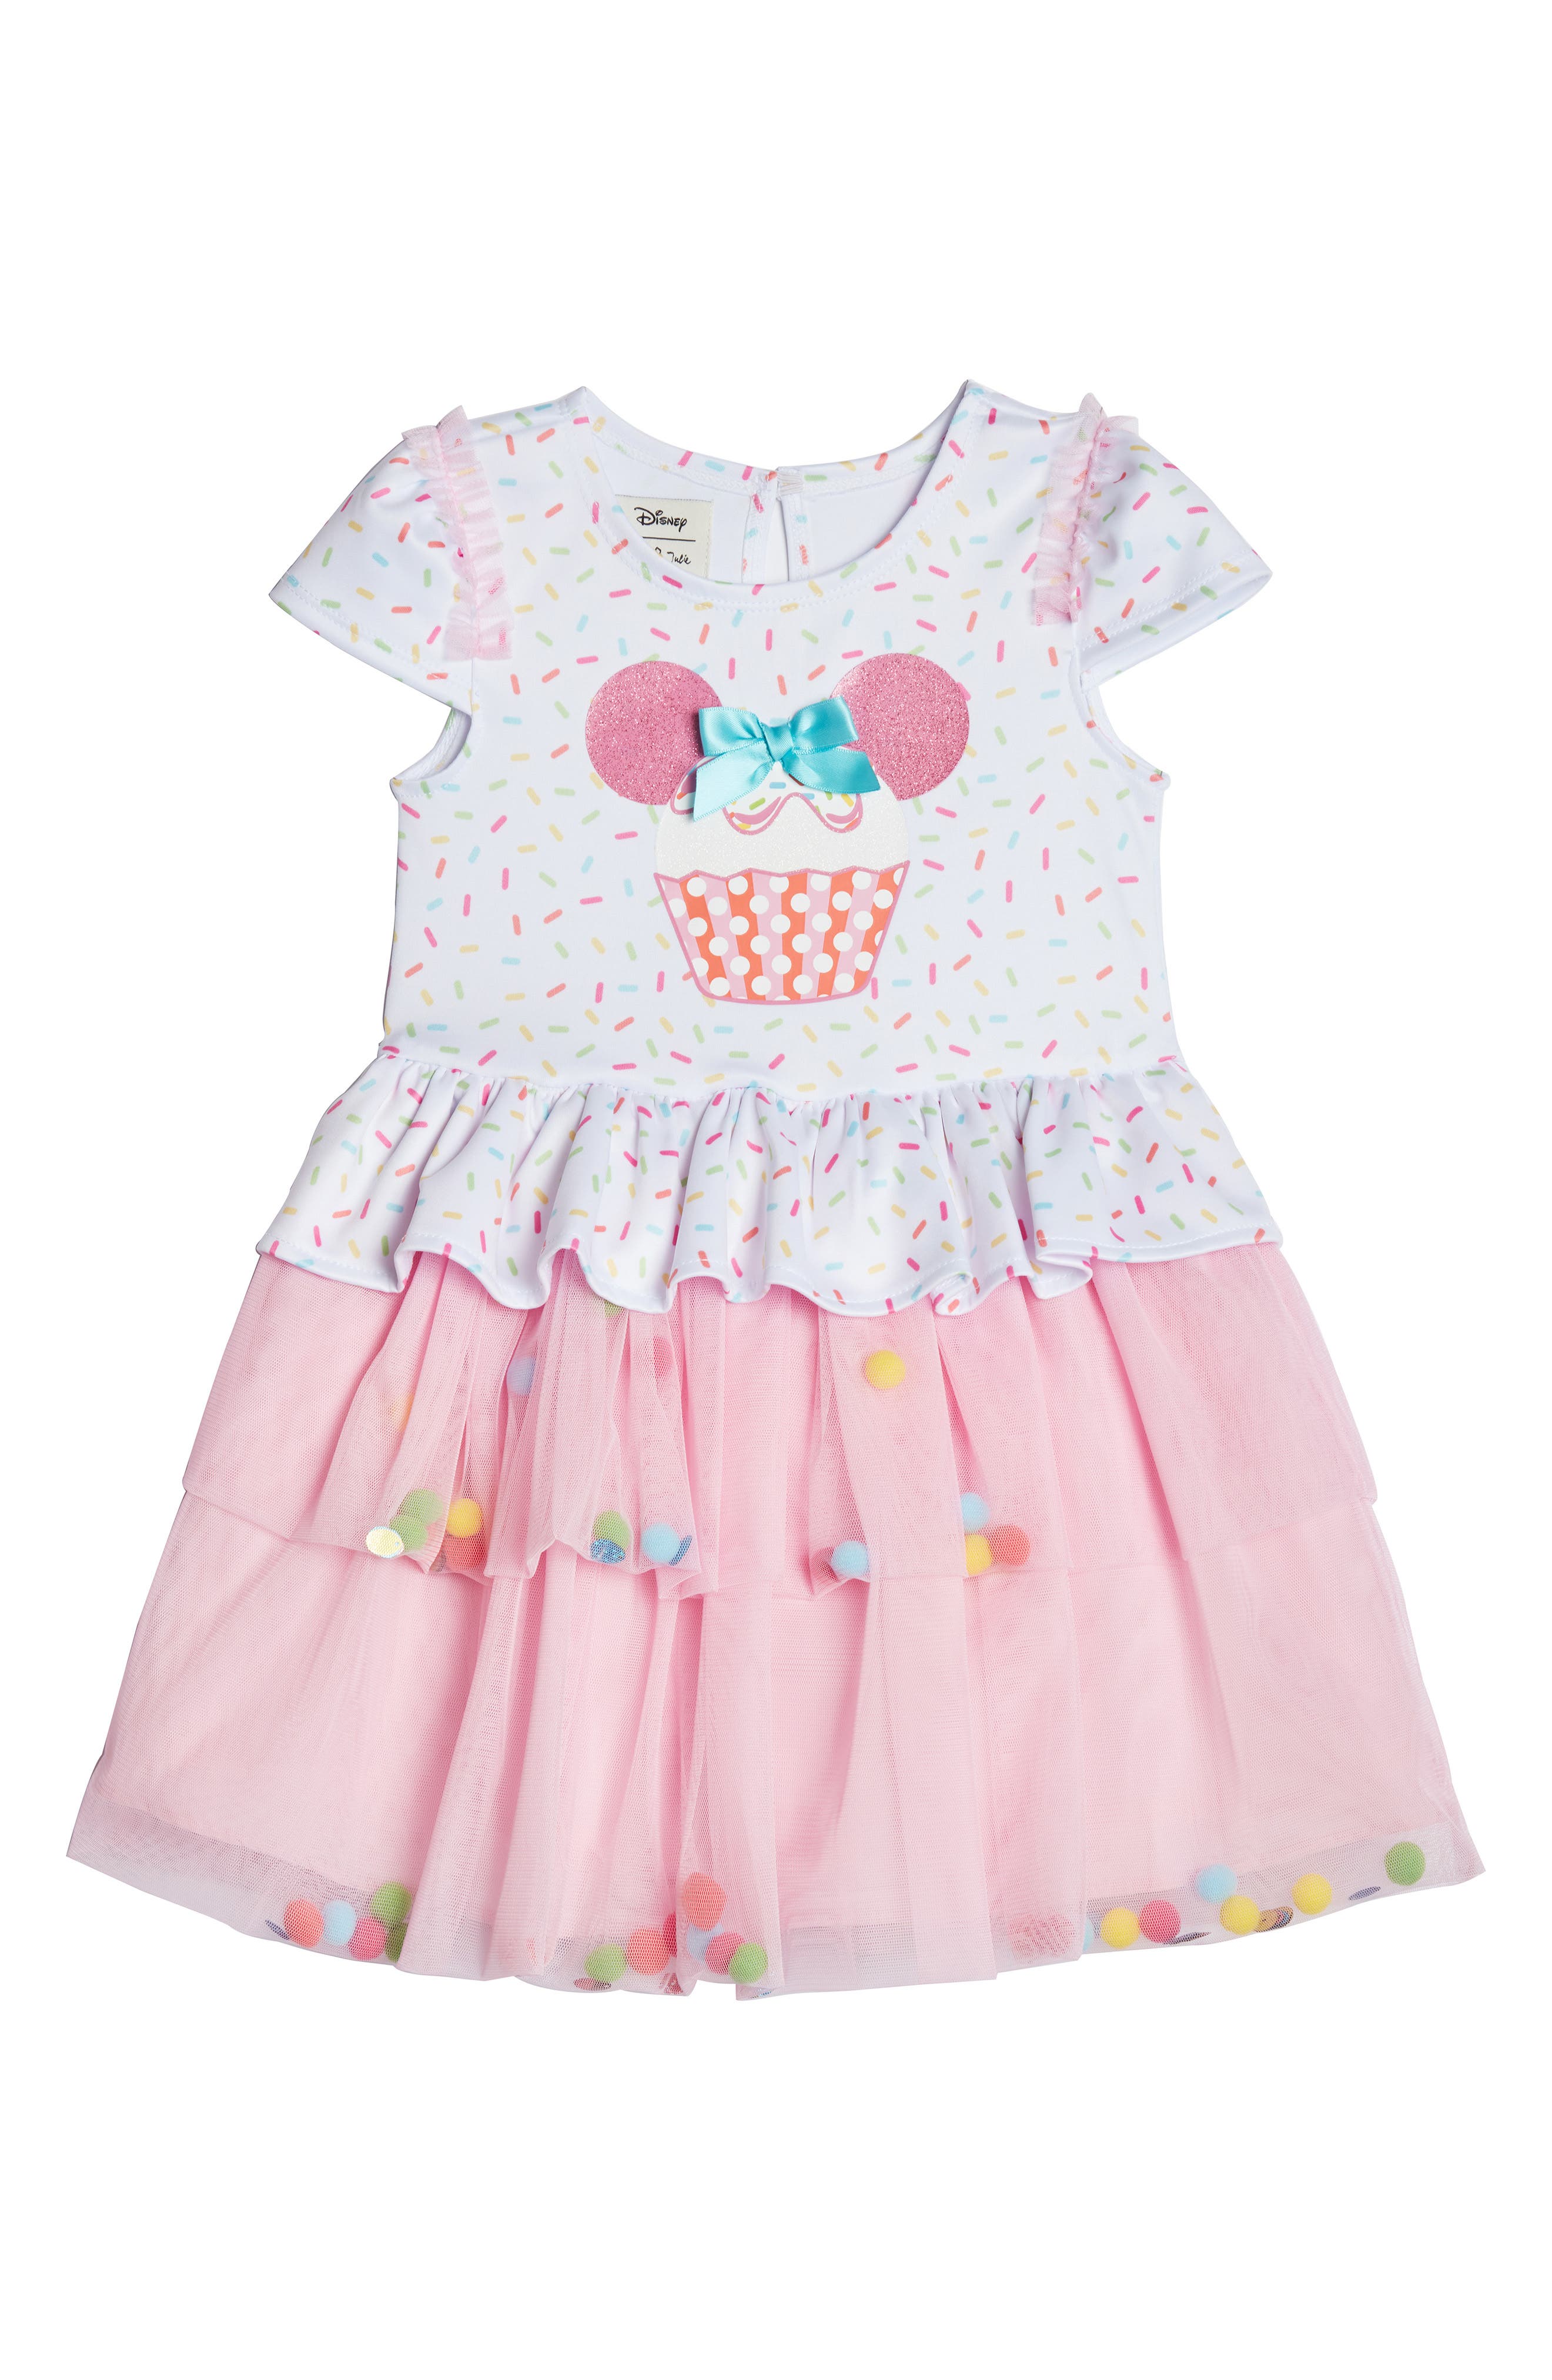 pippa and julie baby dress